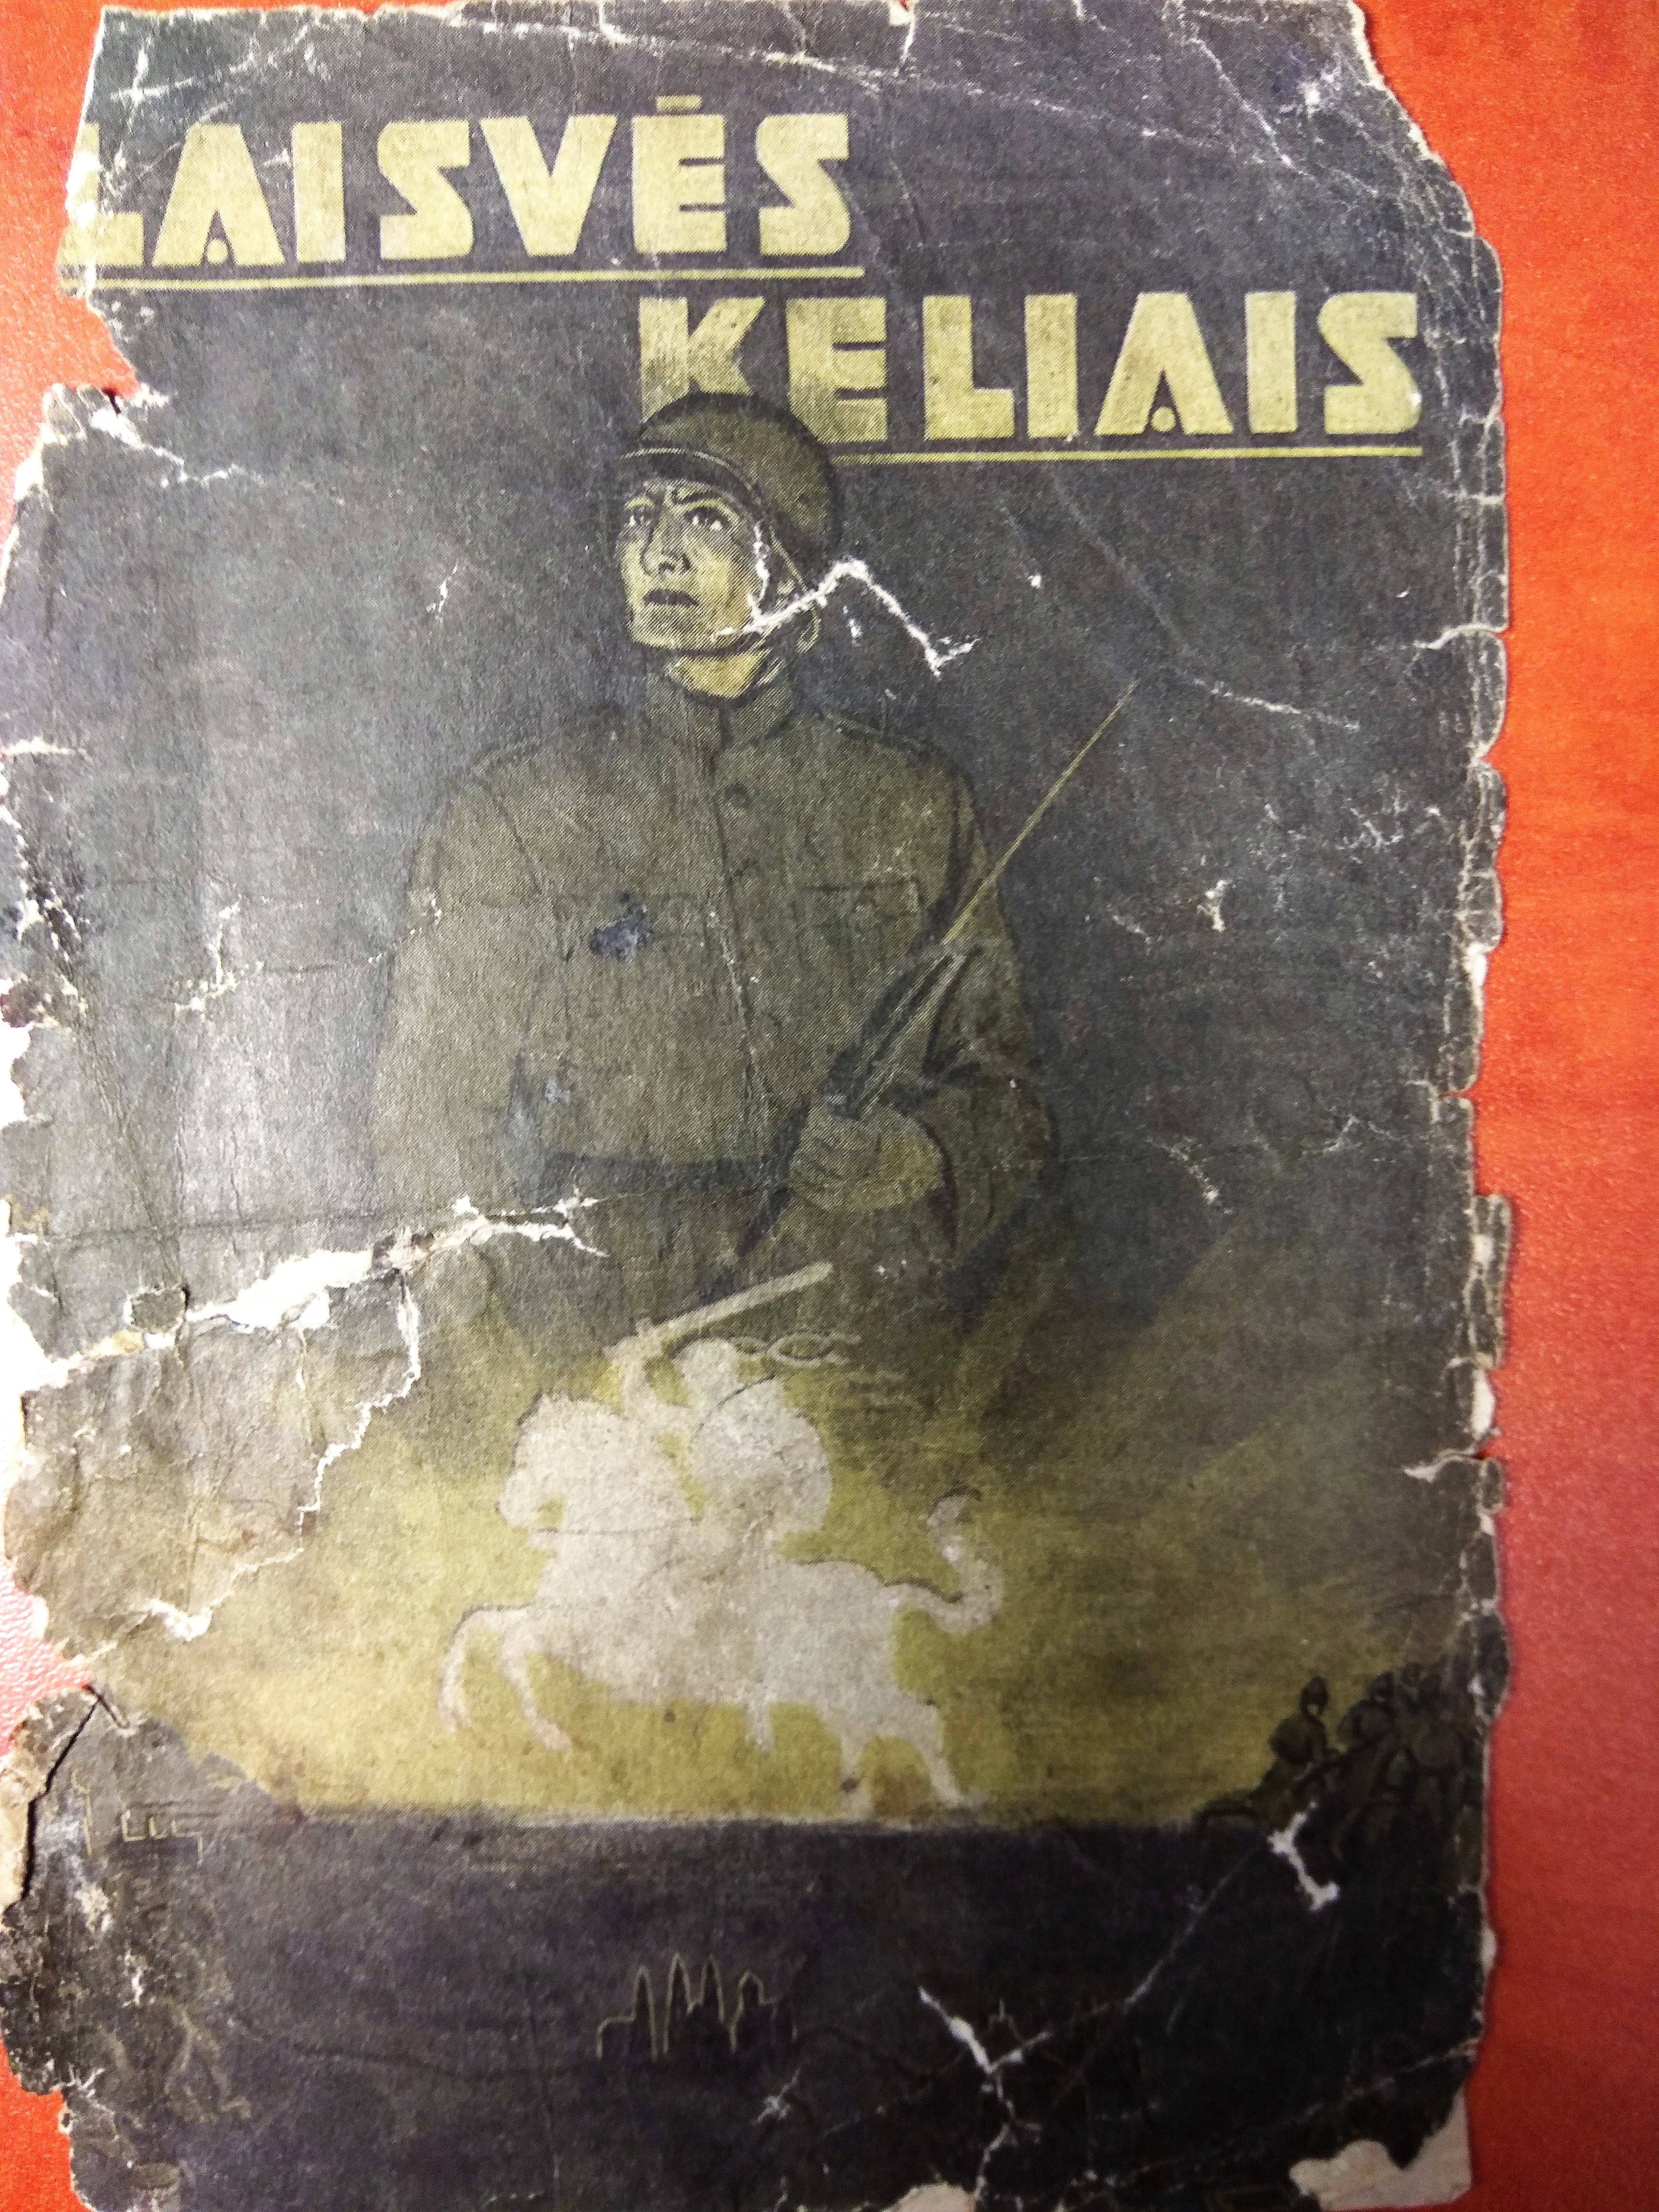 The cover of newspaper 'Laisvės kelias' (Way of Freedom)  made by Lithuanian Anti-soviet partisans.